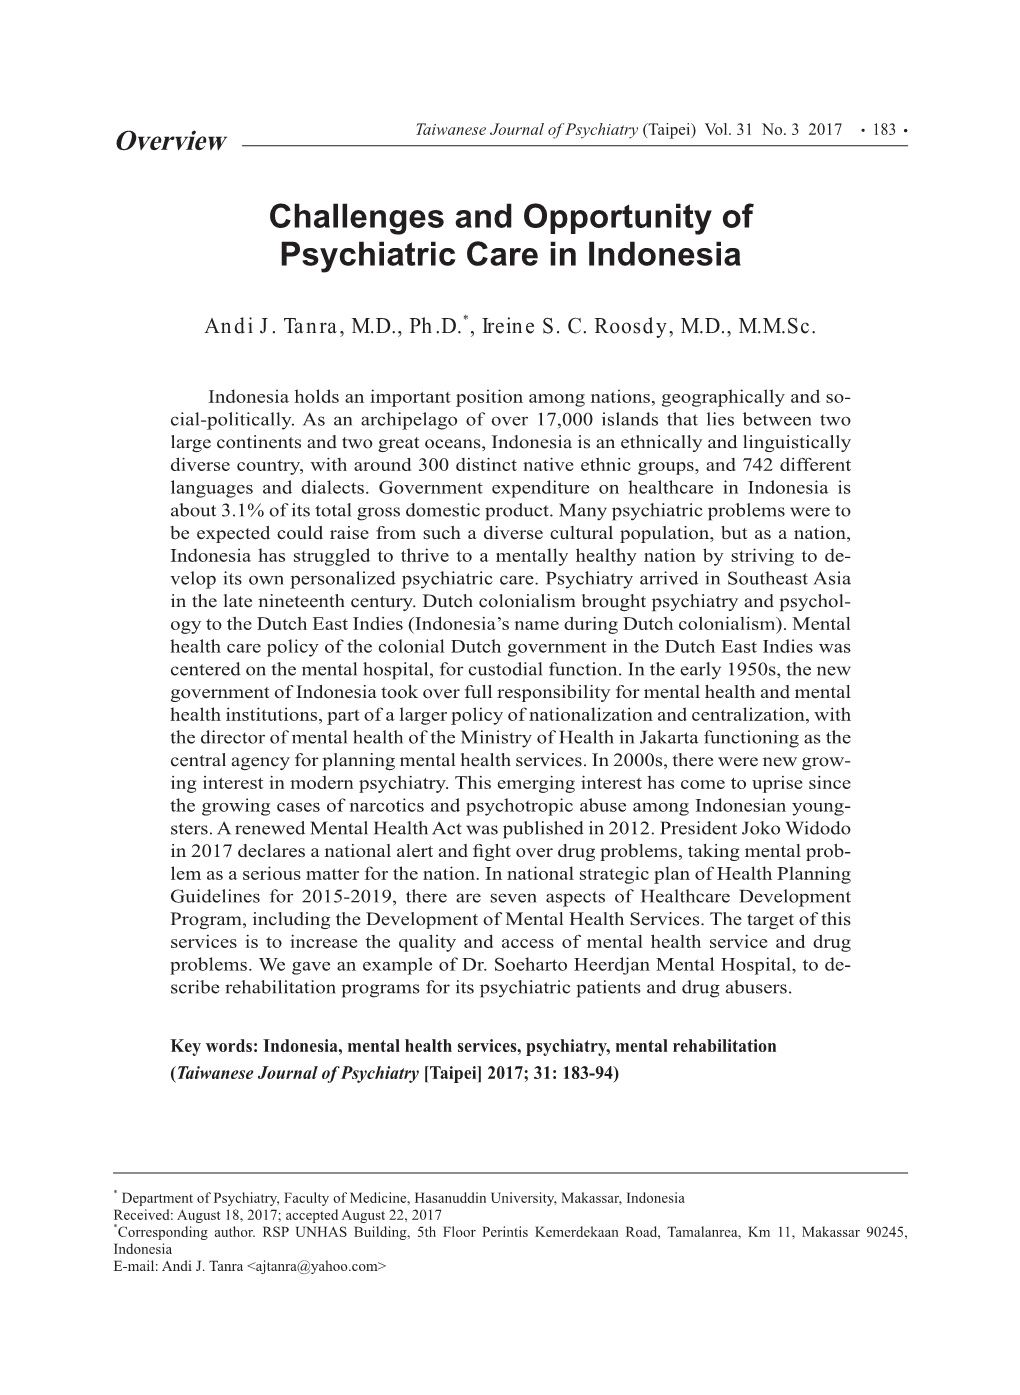 Challenges and Opportunity of Psychiatric Care in Indonesia